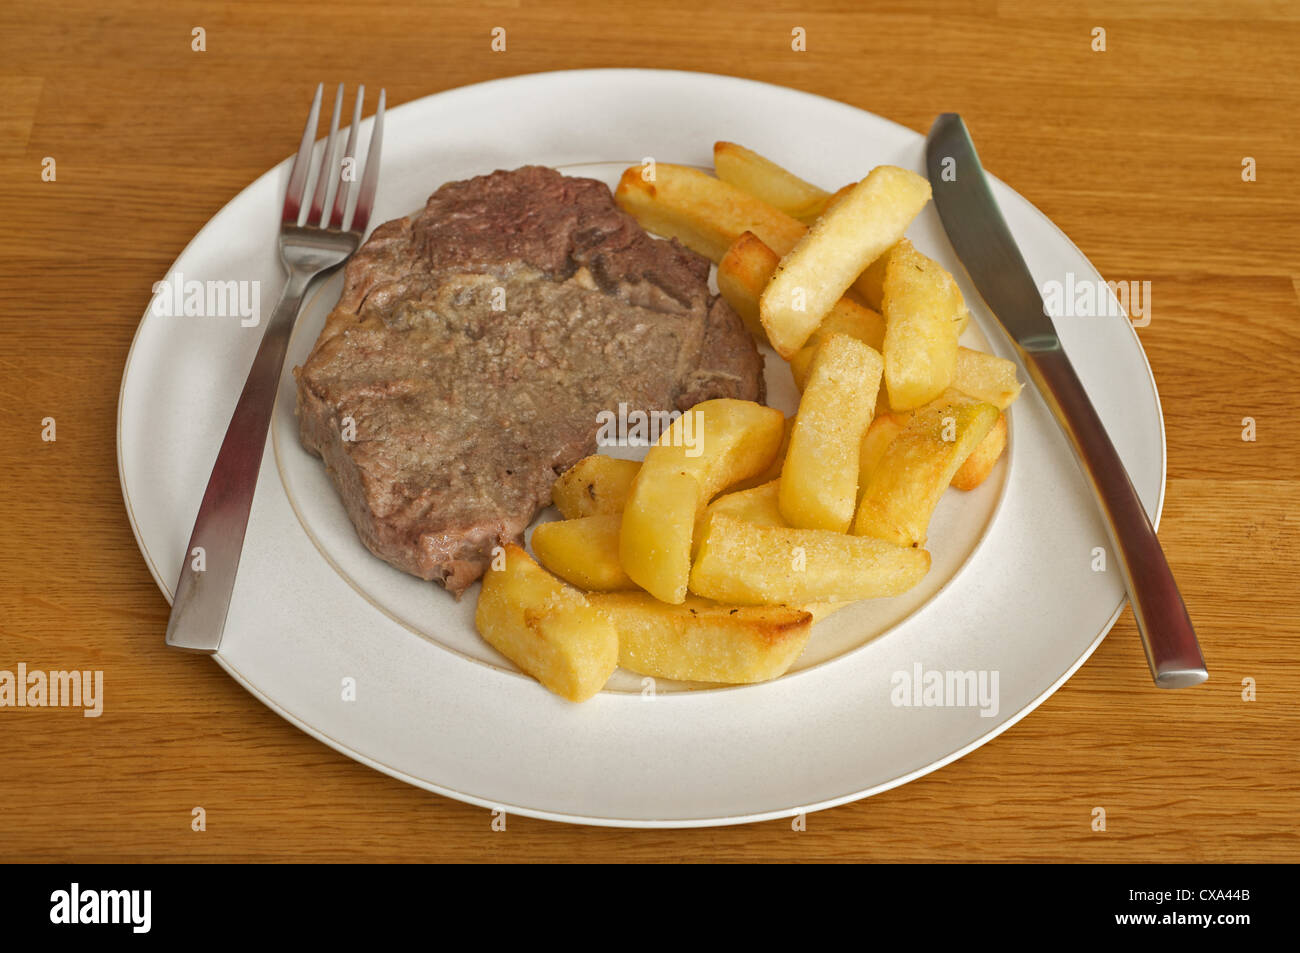 Steak and thickly-cut chips Stock Photo